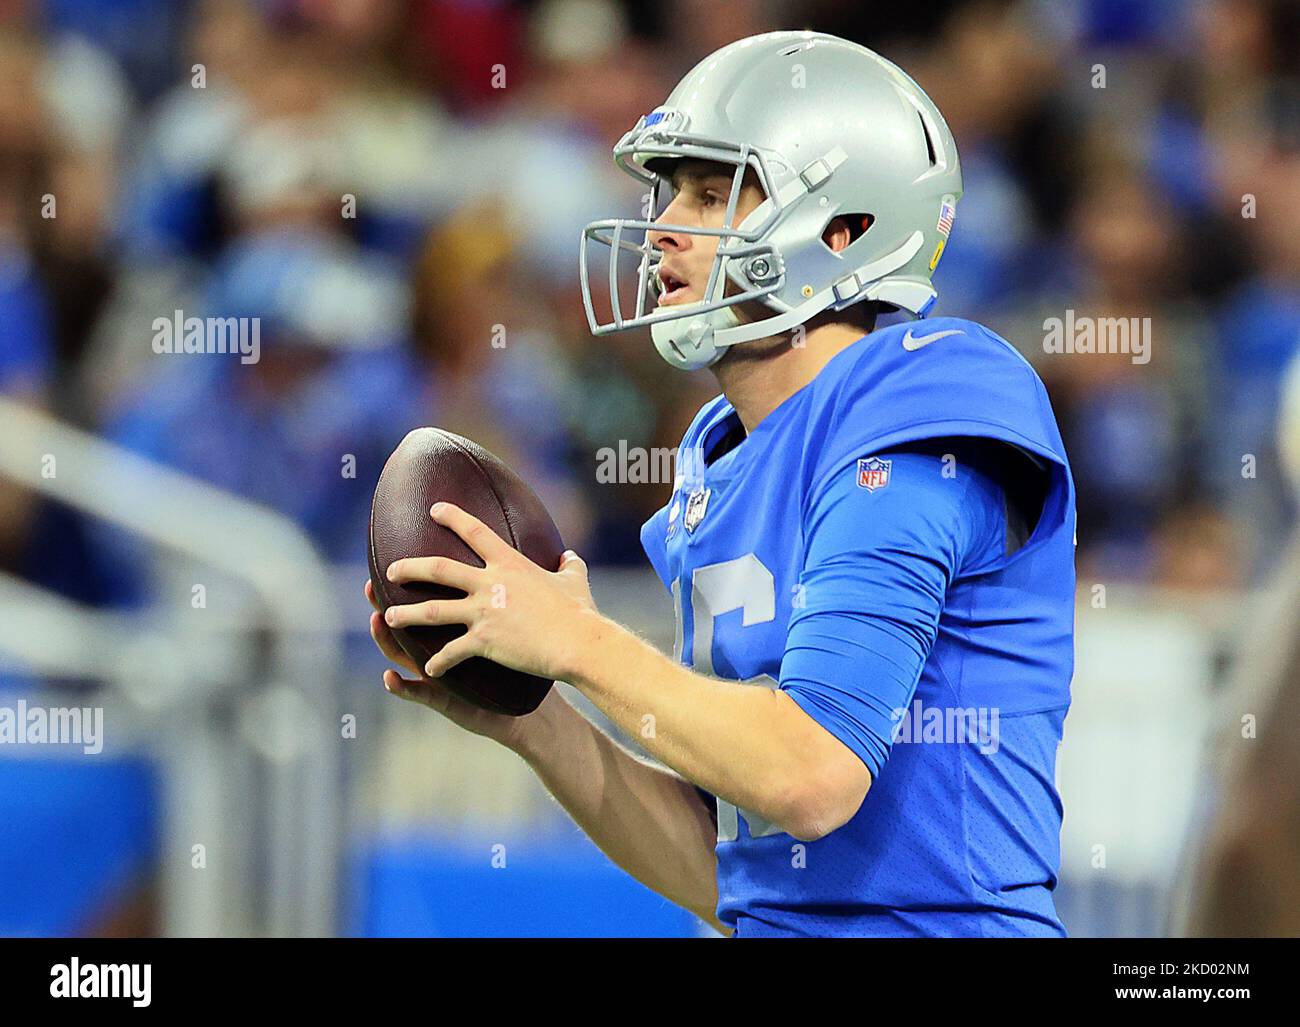 Detroit Lions quarterback Jared Goff (16) catches the snap during an NFL football game between the Detroit Lions and the Green Bay Packers in Detroit, Michigan USA, on Sunday, January 9, 2022. (Photo by Amy Lemus/NurPhoto) Stock Photo